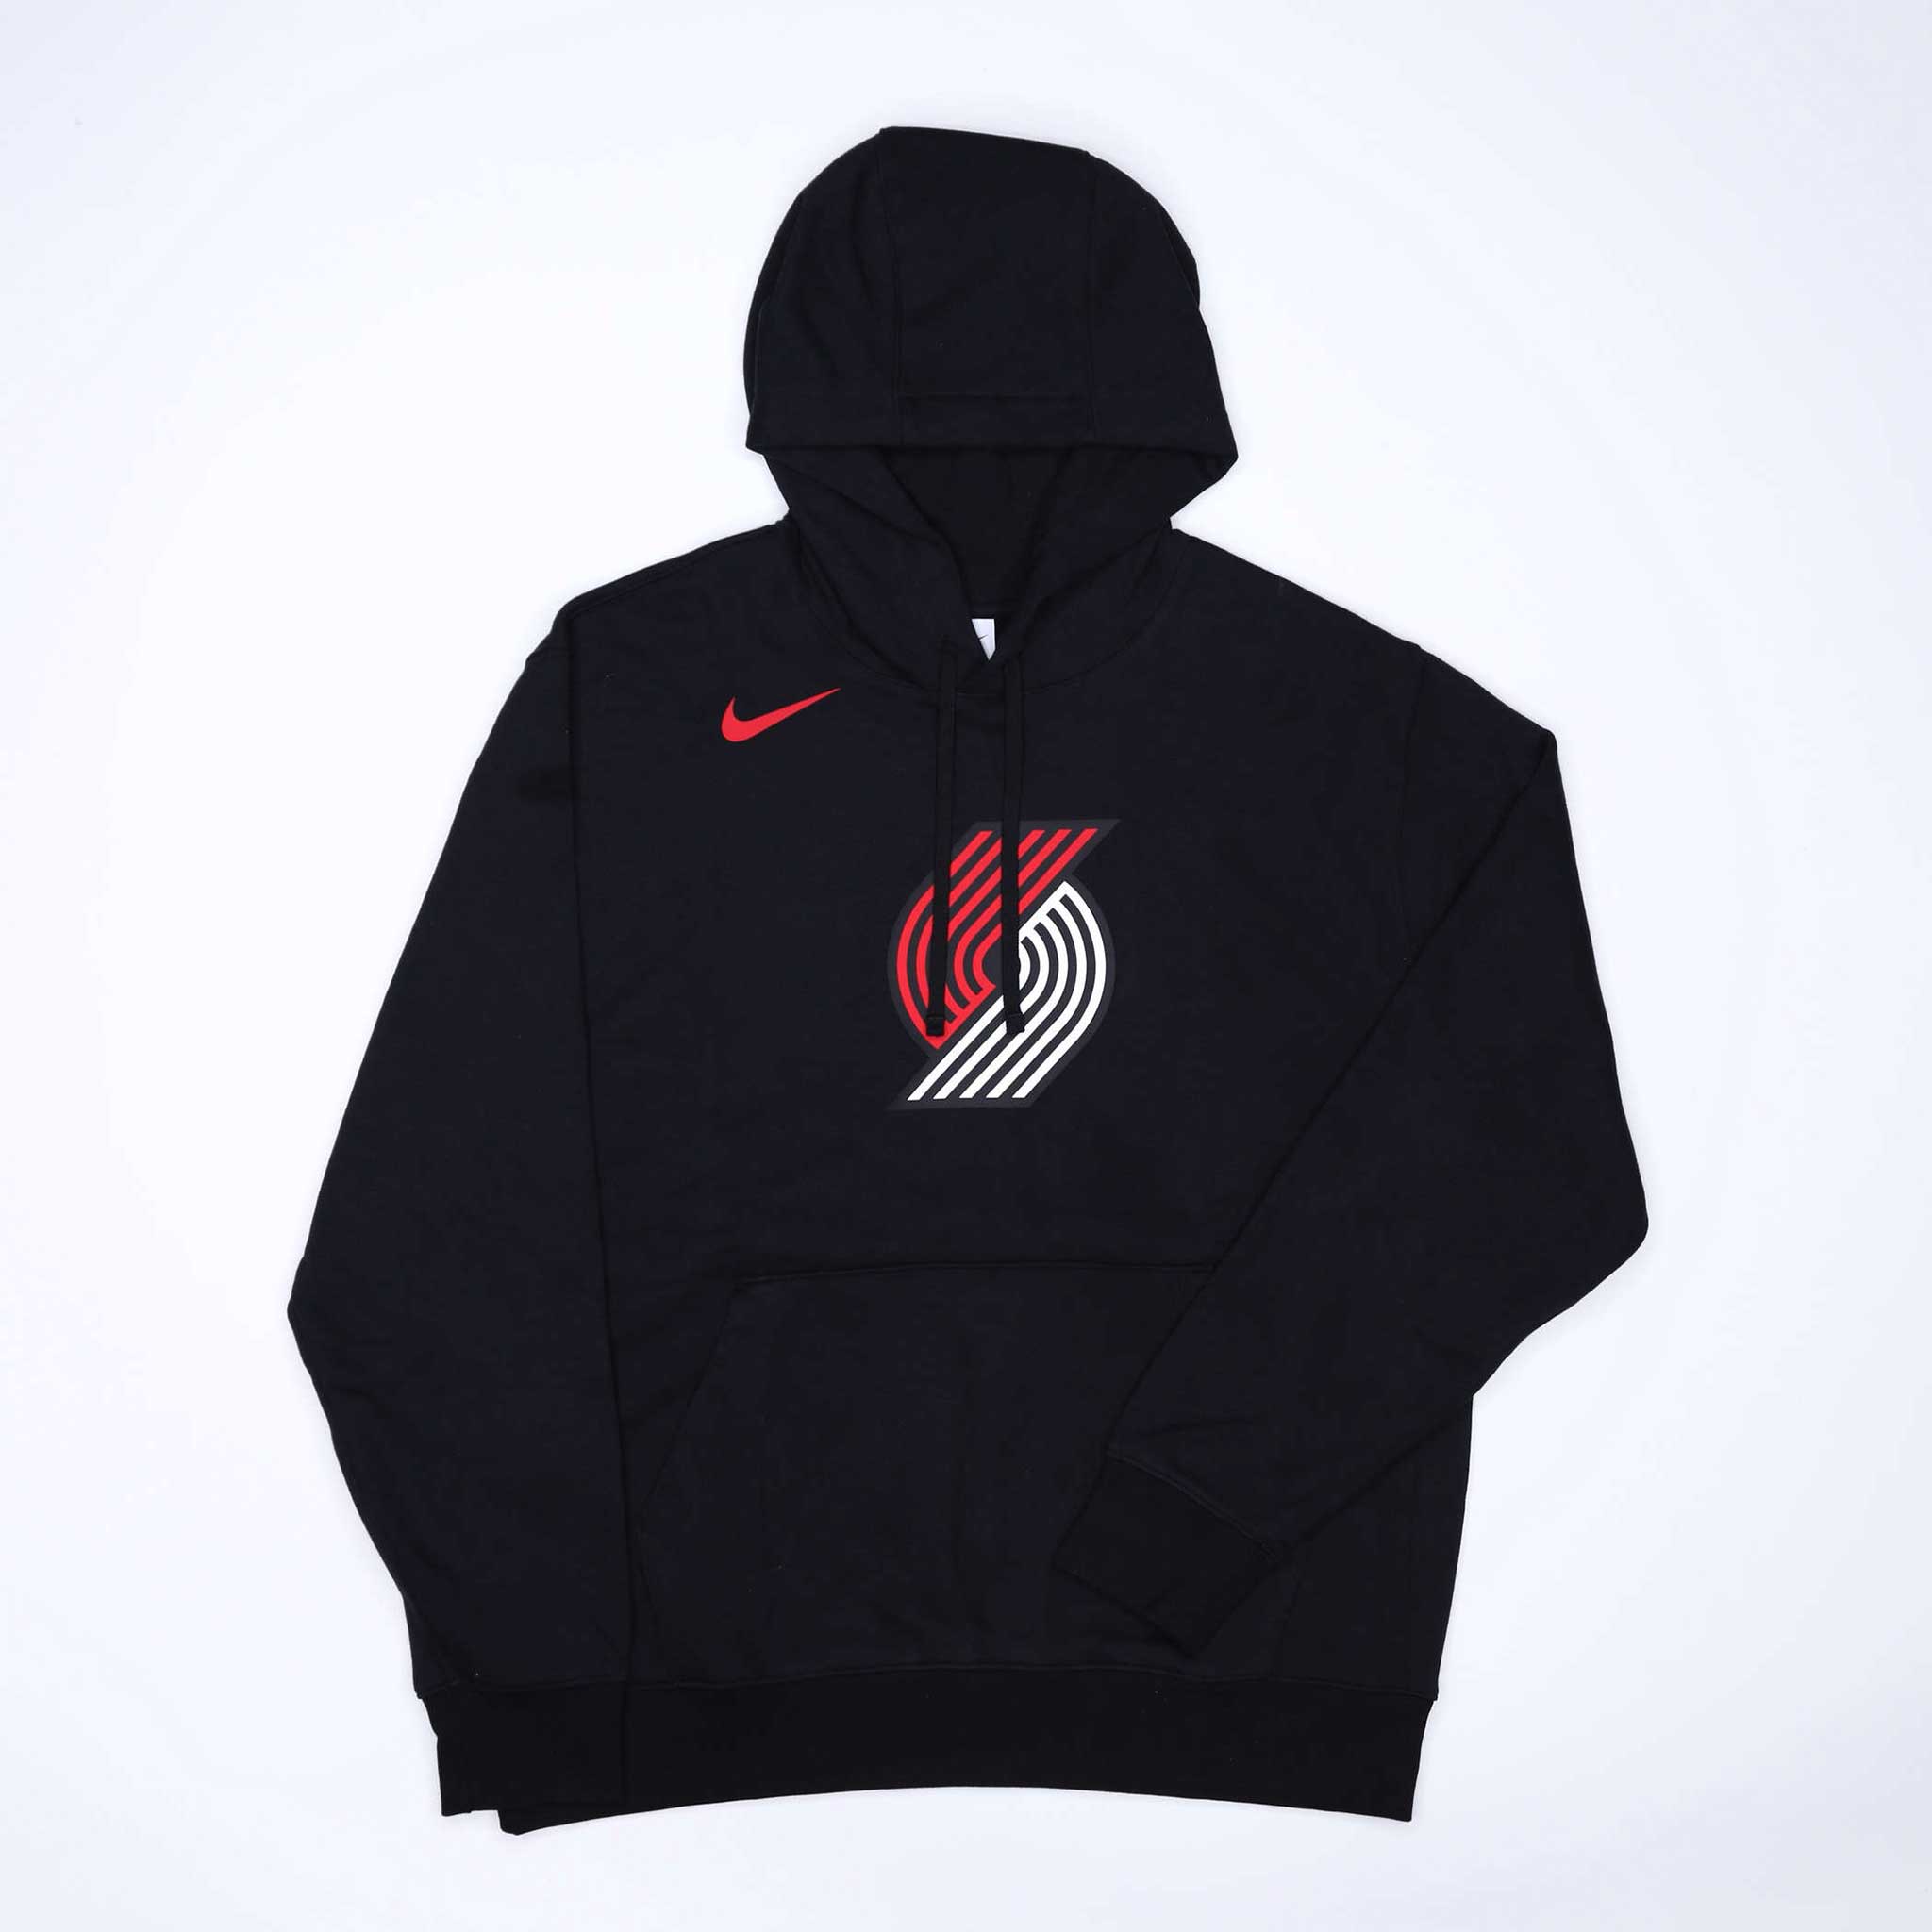 Lillard Authentic Icon Jersey  Rip City Clothing - Official Blazers Team  Store